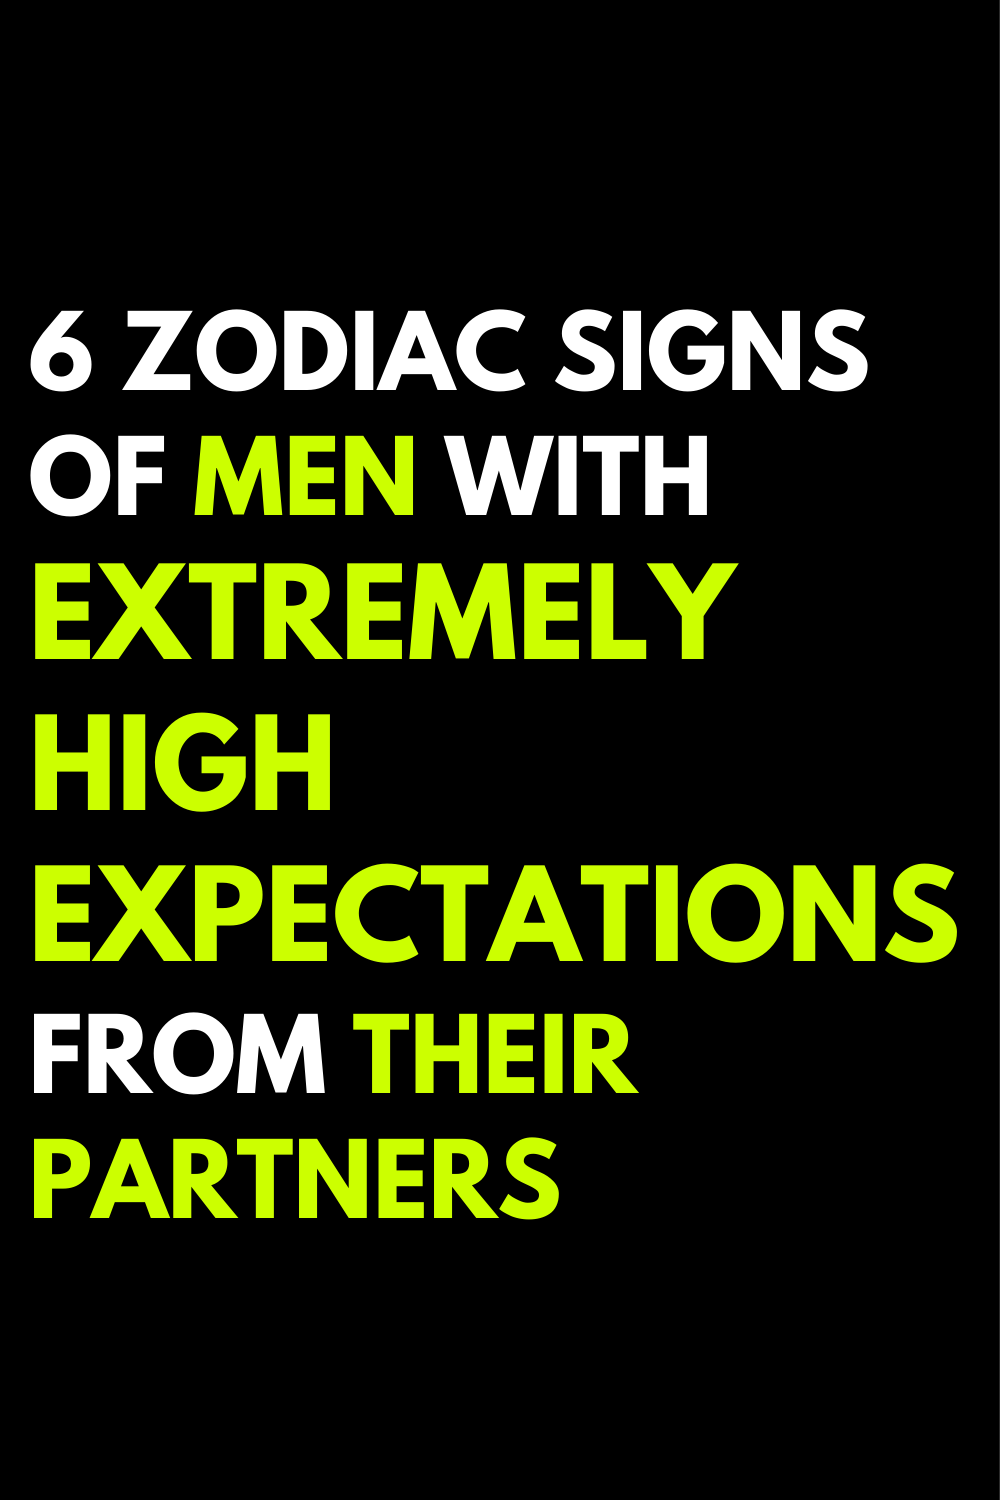 6 zodiac signs of men with extremely high expectations from their partners